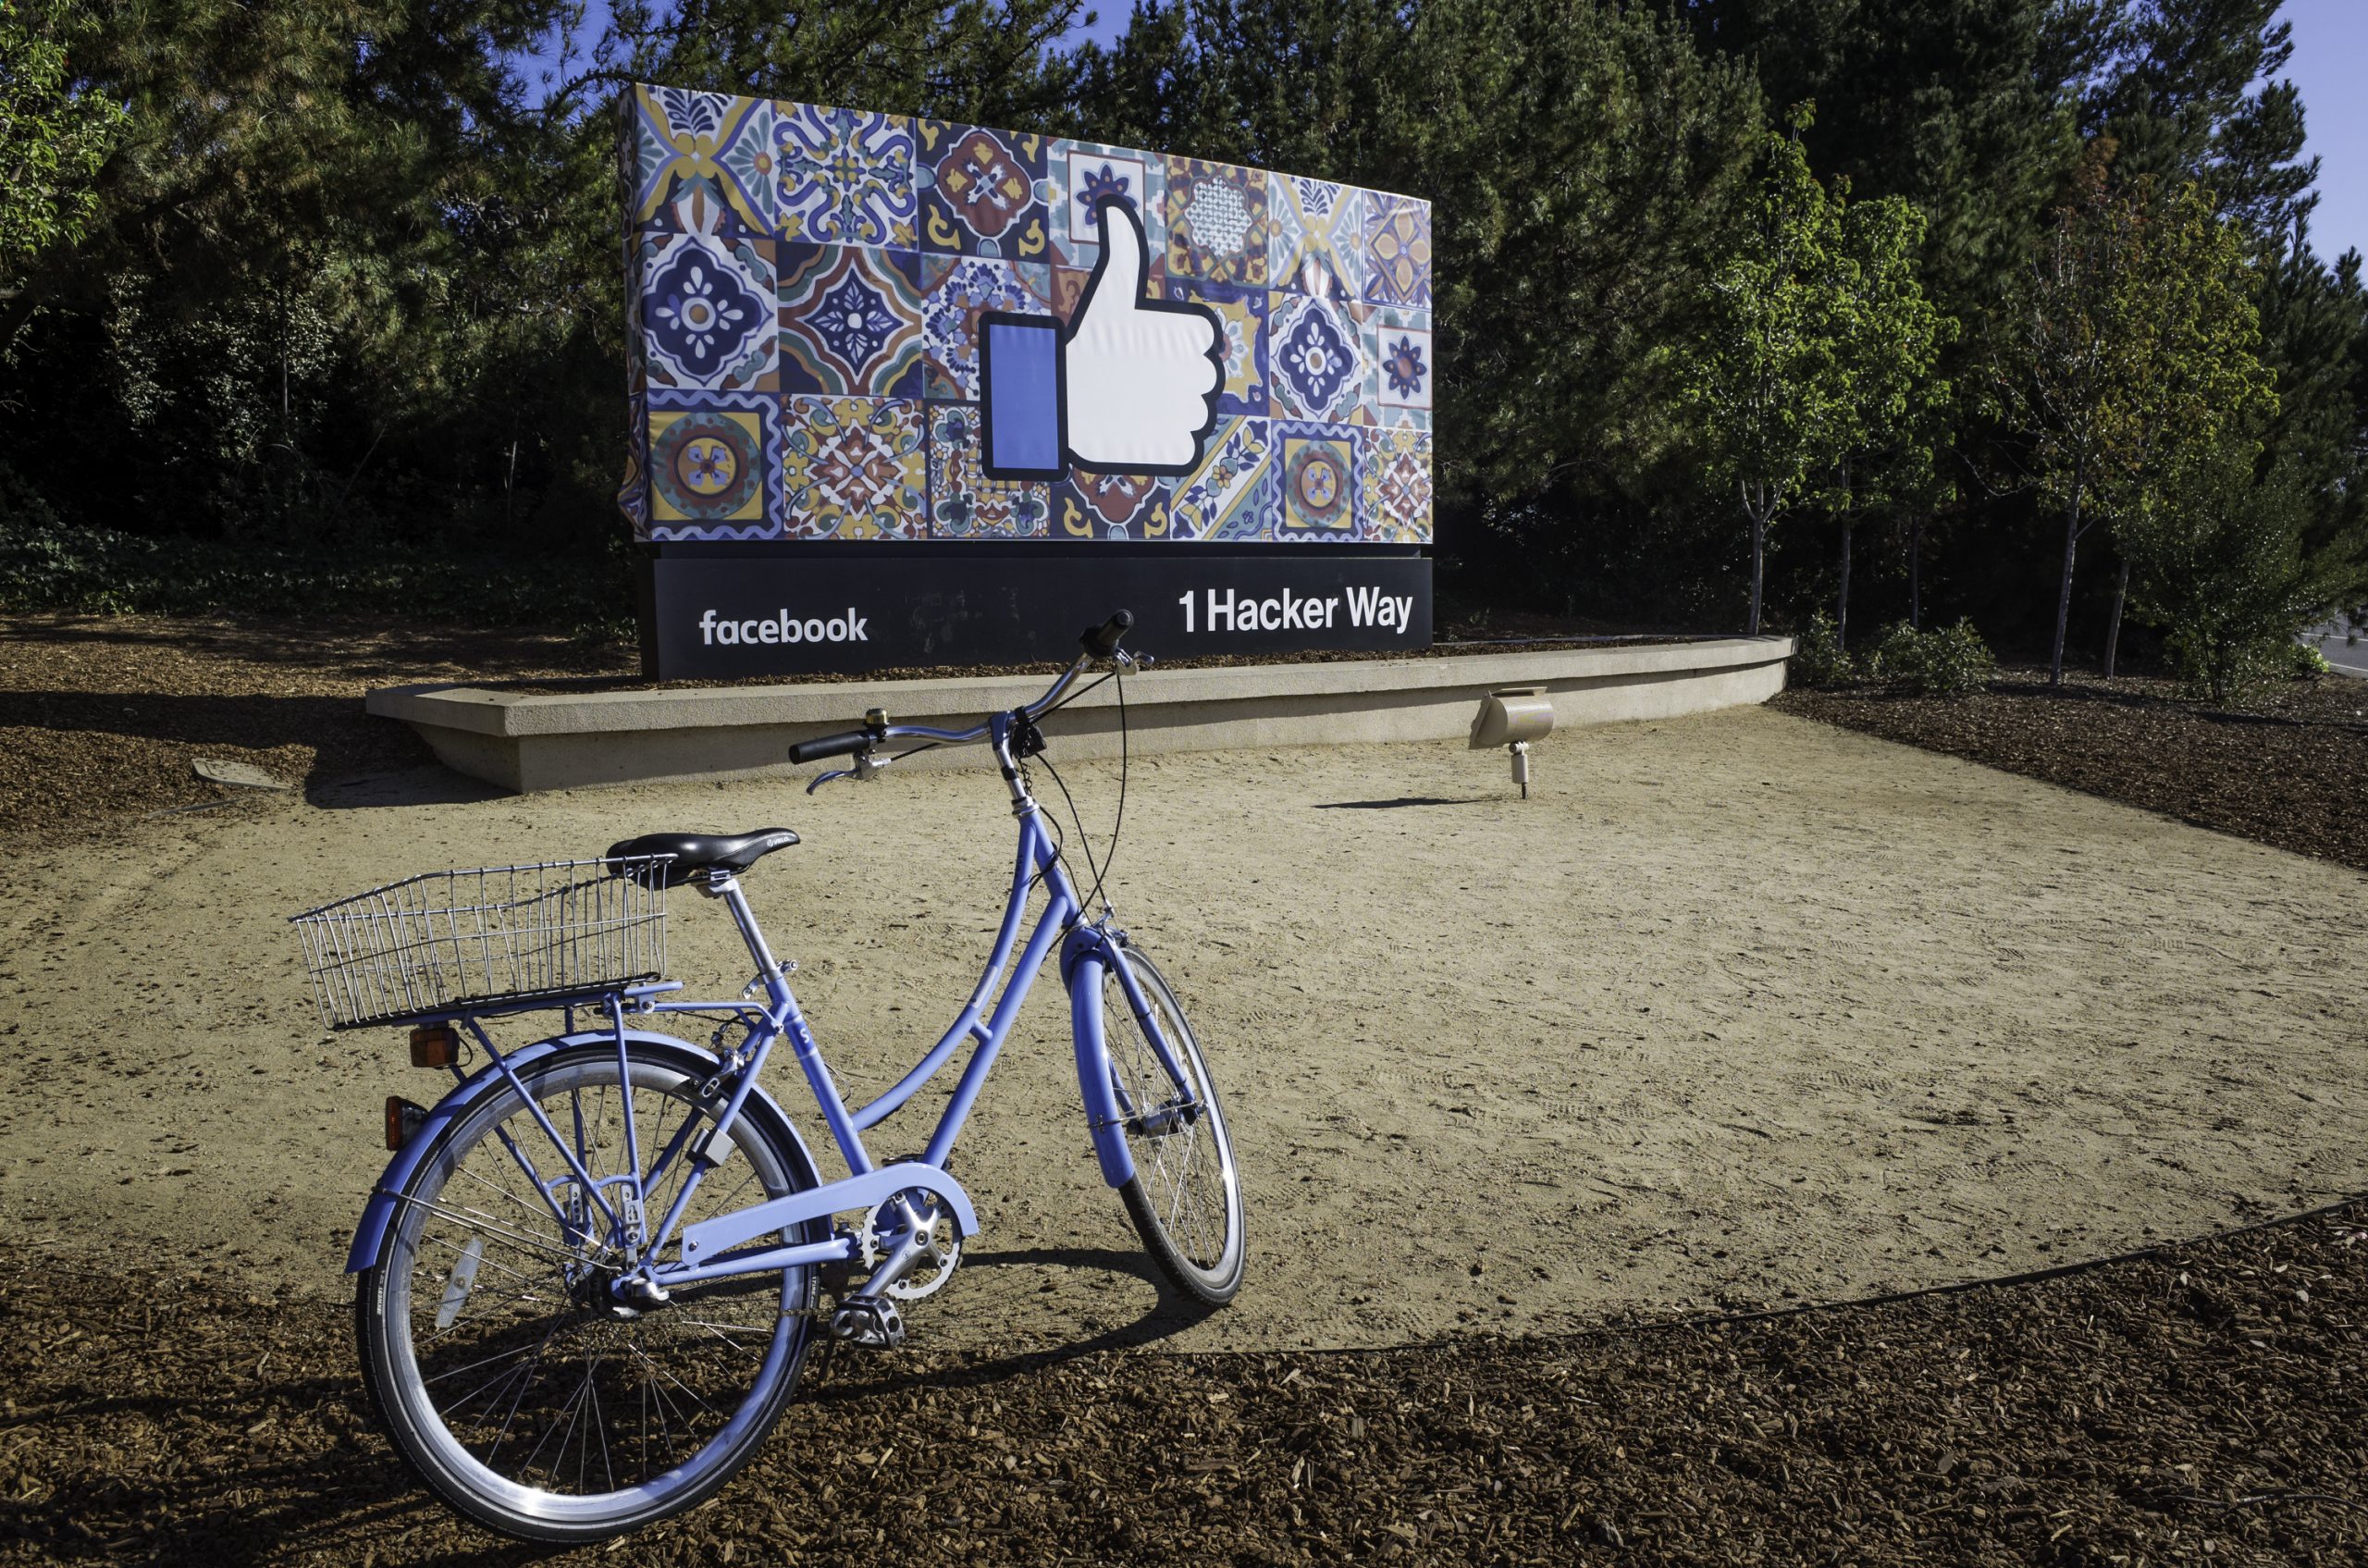 Menlo Park Facebook Sign with a blue bike in front of it.